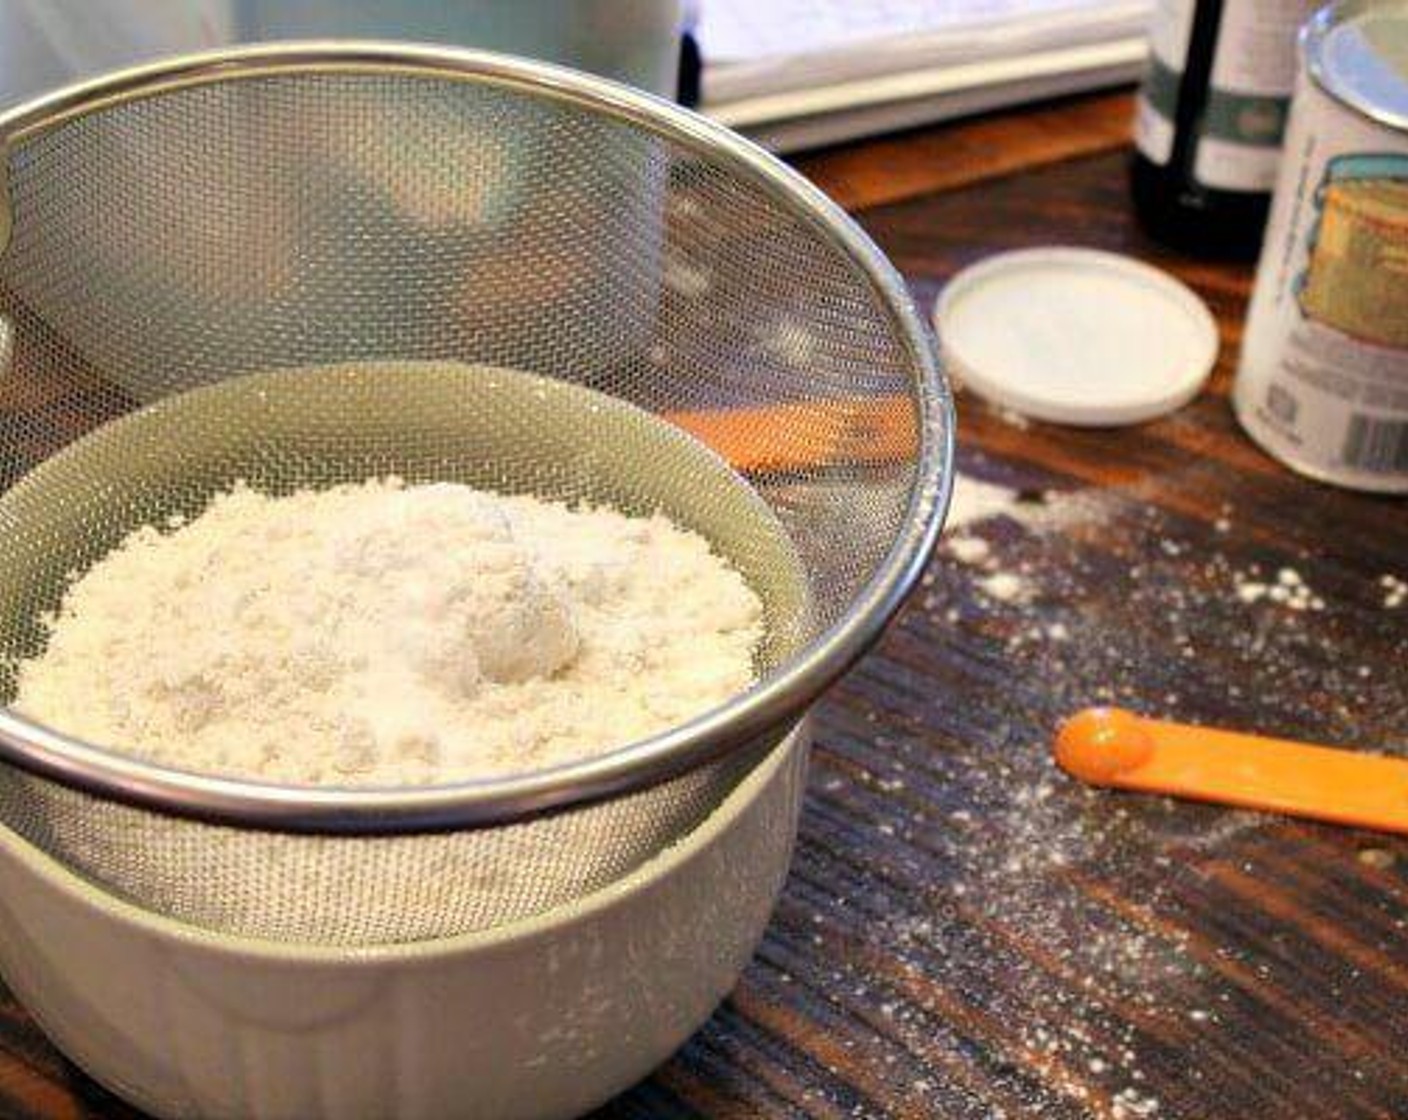 step 4 In a small bowl, sift All-Purpose Flour (1 cup), Baking Powder (1 tsp), Baking Soda (1/4 tsp) and Salt (1/4 tsp).